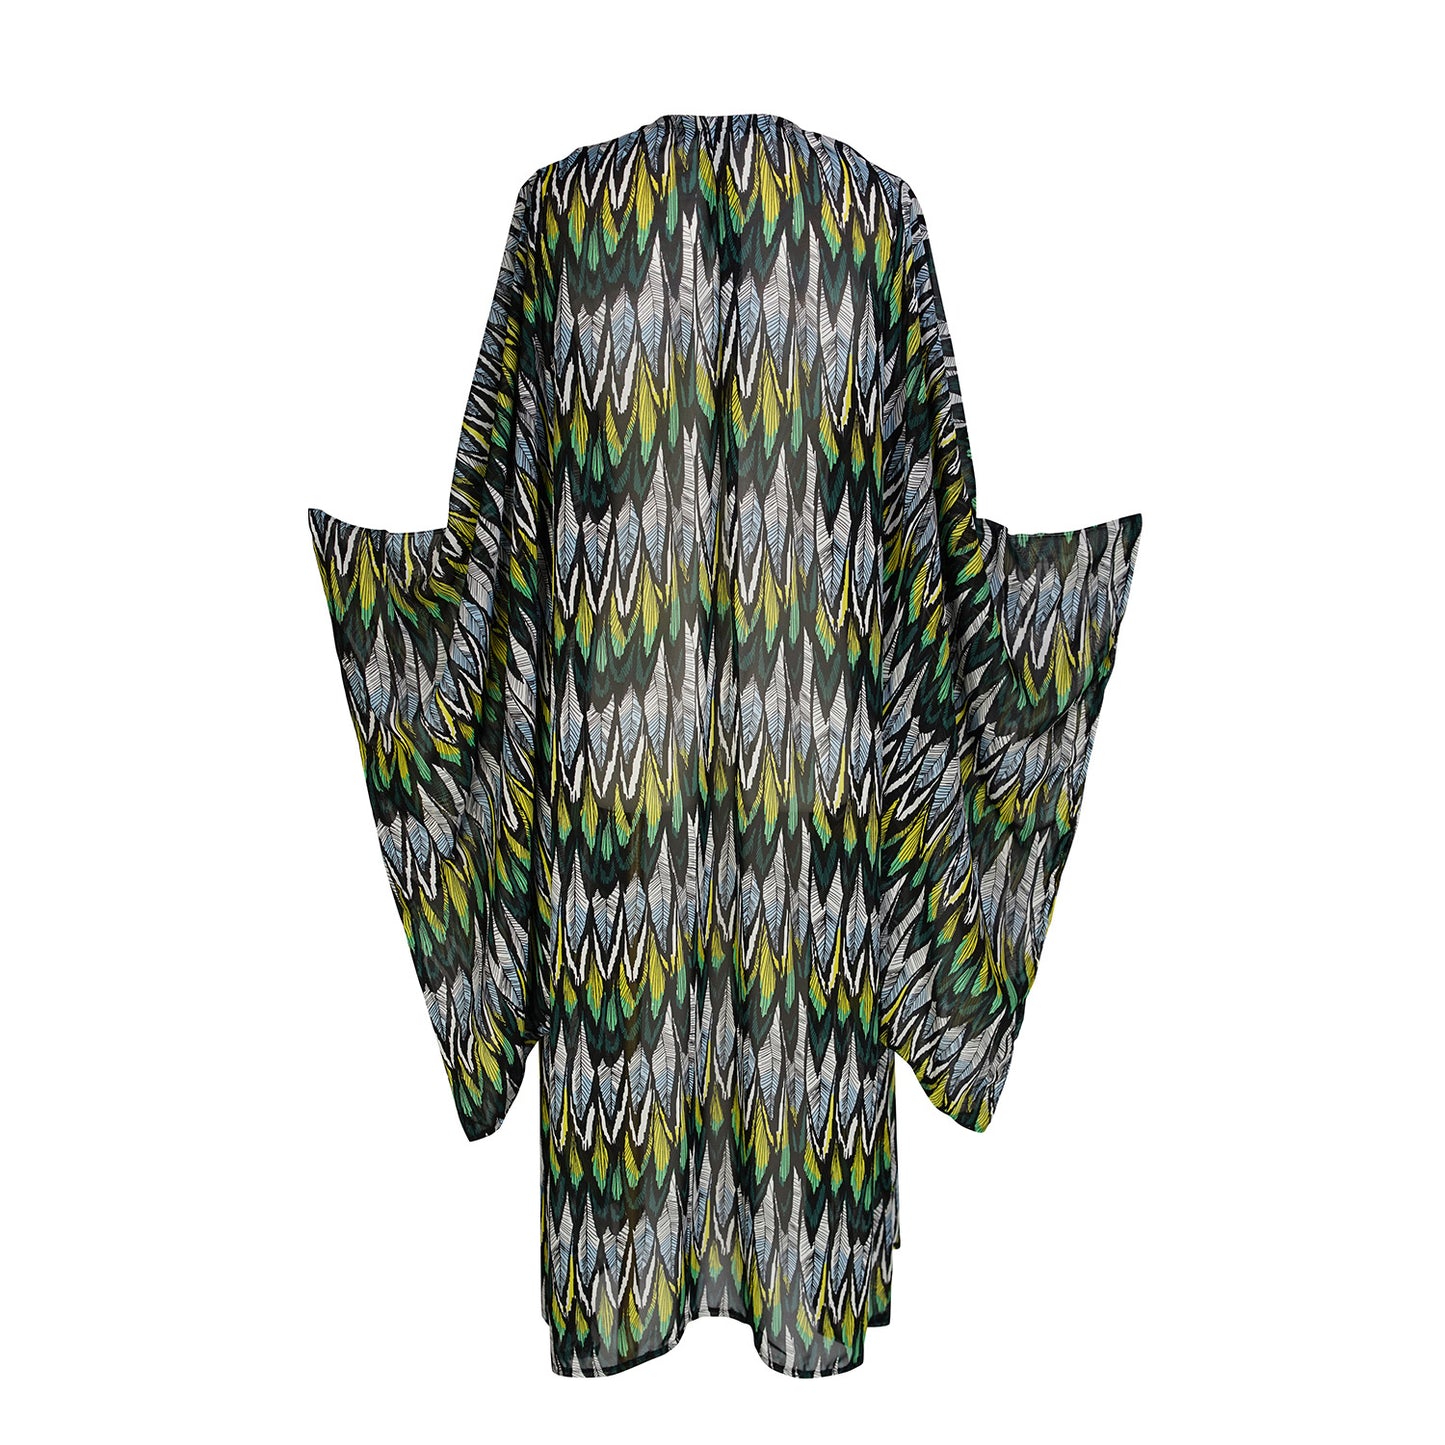 jennafer grace Macaw Verde Feather kimono semi-sheer chiffon with yellow-green and white and black feather print cover-up wrap dress with pockets duster jacket robe boho boho bohemian hippie whimsical romantic beach poolside resort cabana lounge wear unisex handmade in California USA